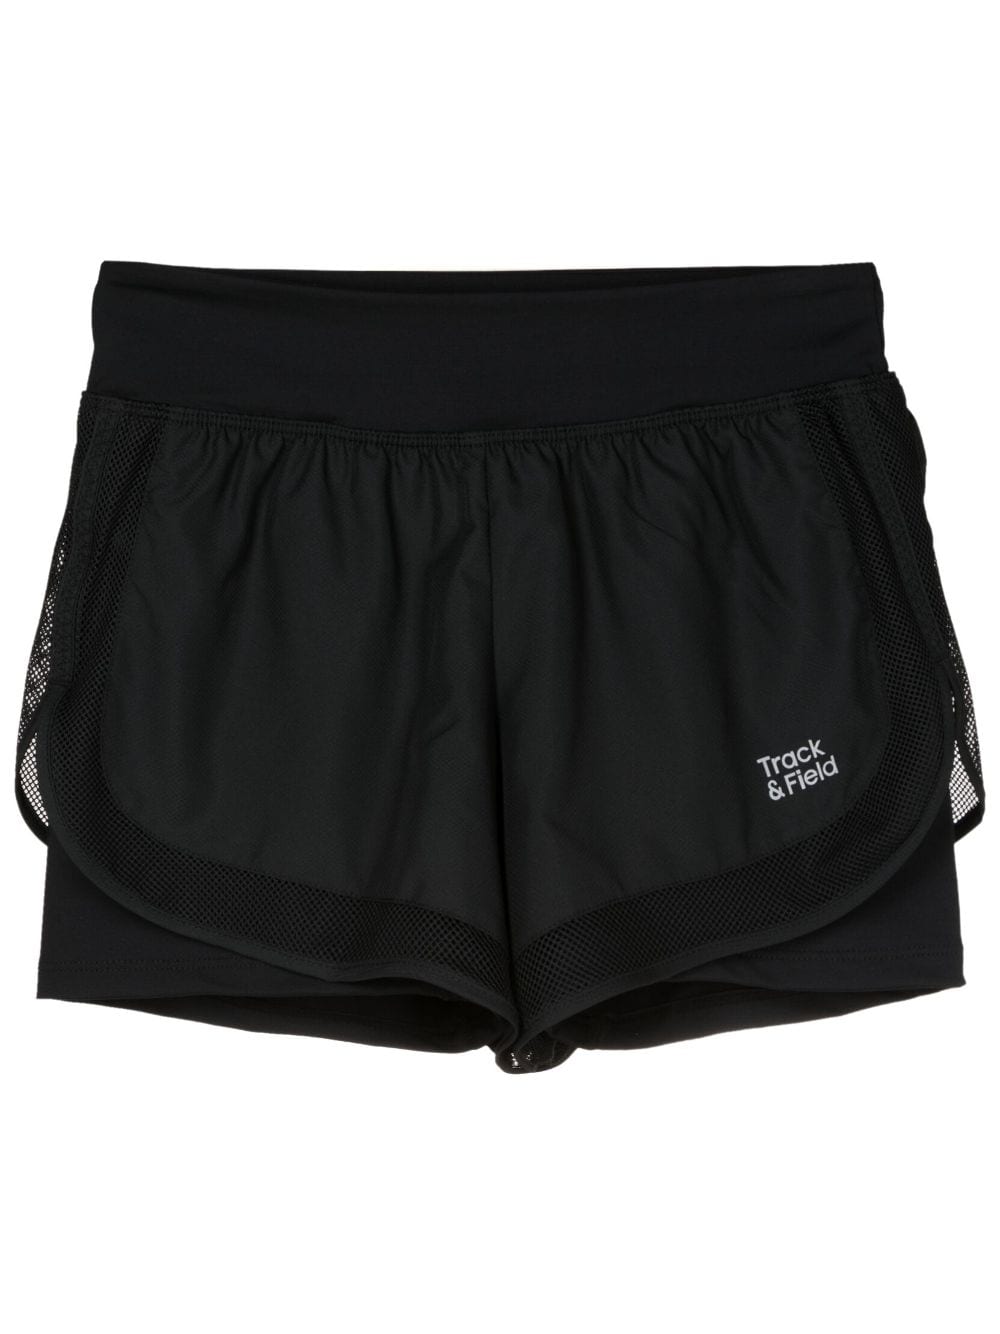 Athletic Track and Field Briefs - BLACK